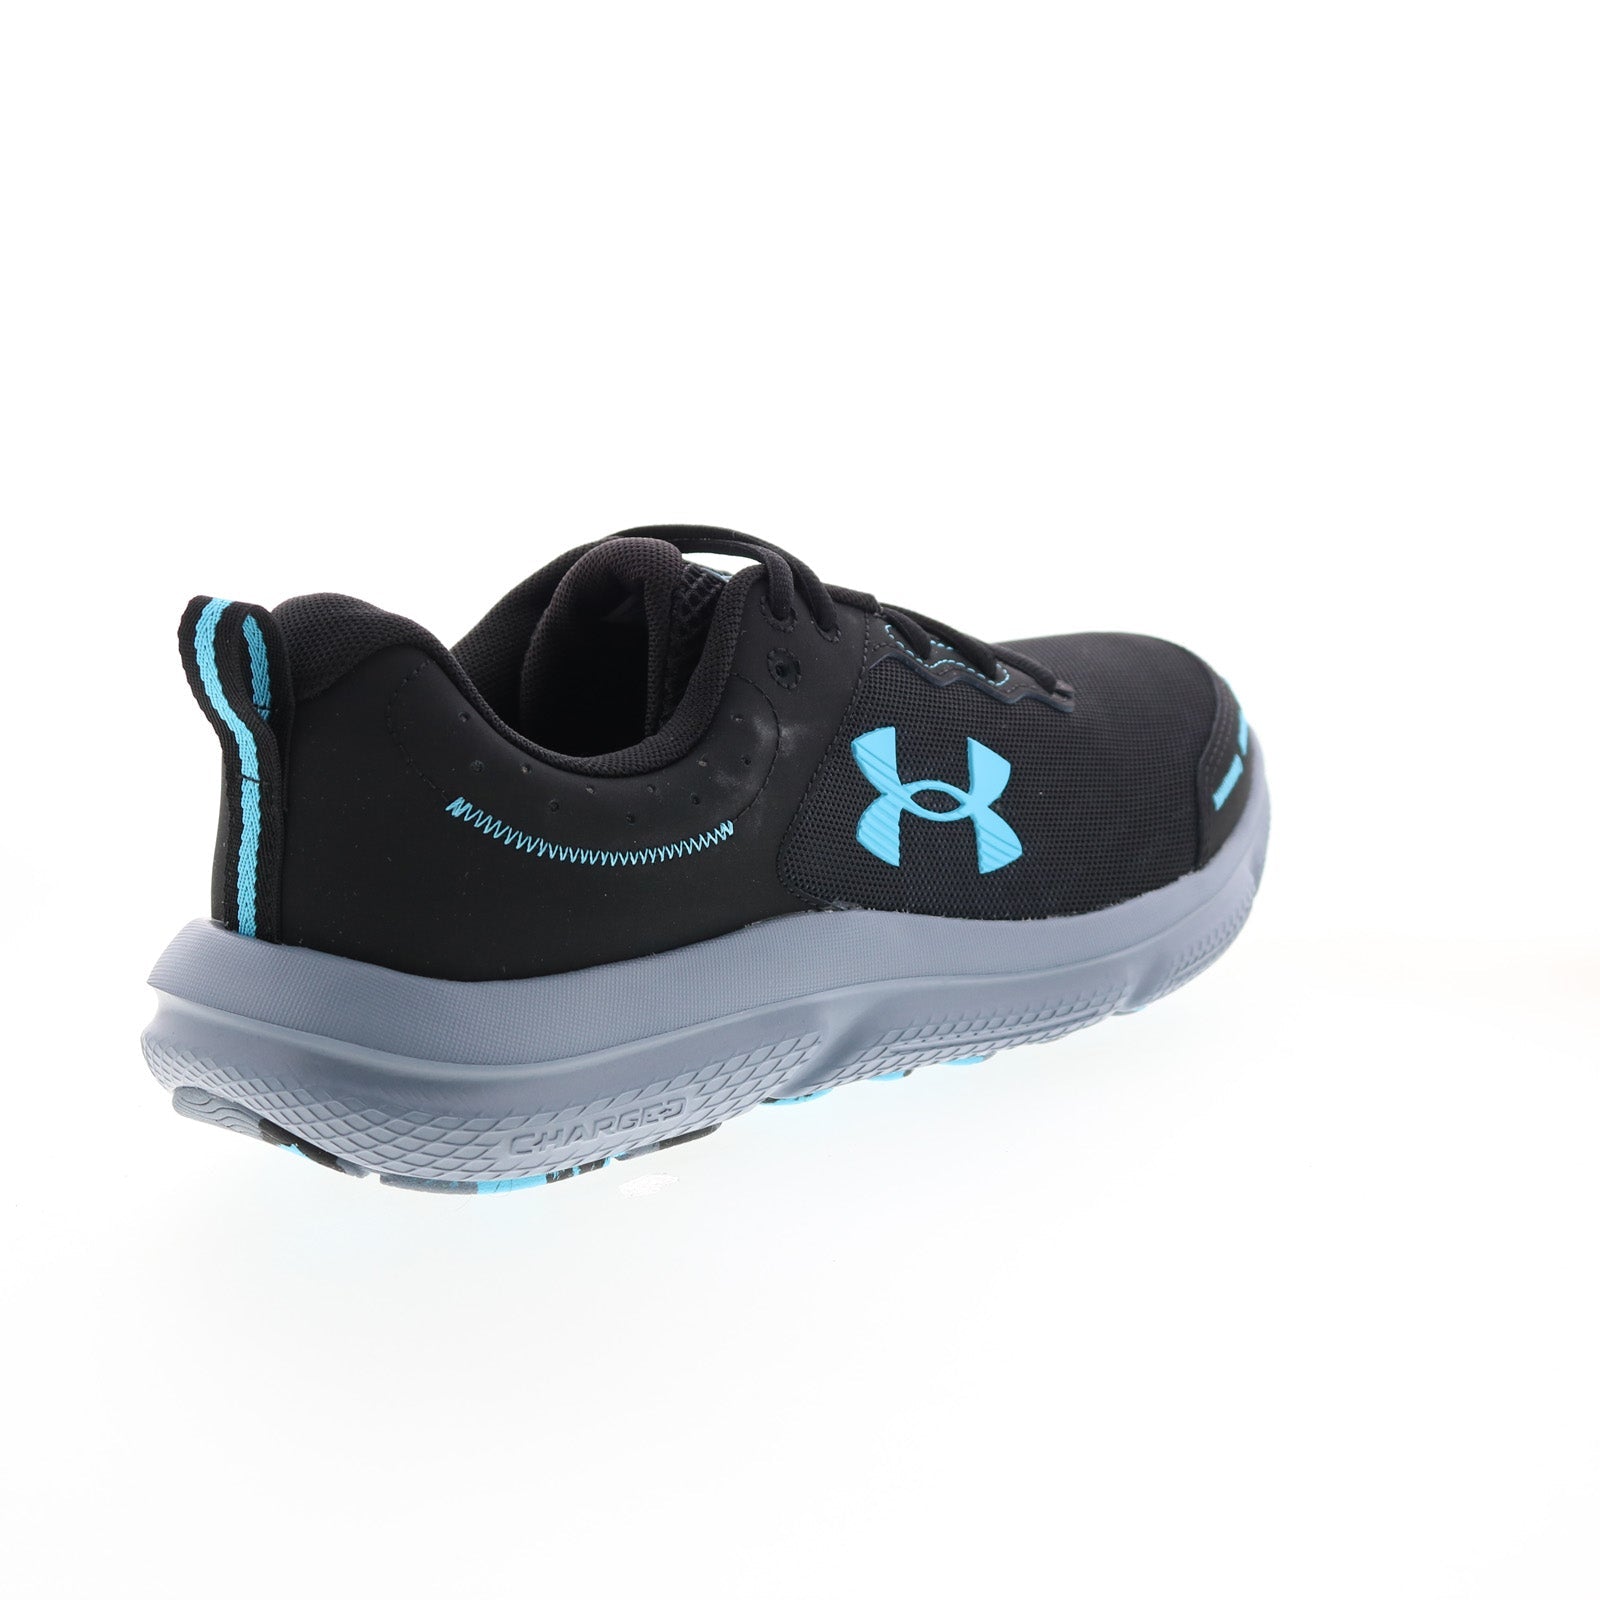 Under Armour Charged Assert 10 Mens Black Canvas Athletic Running